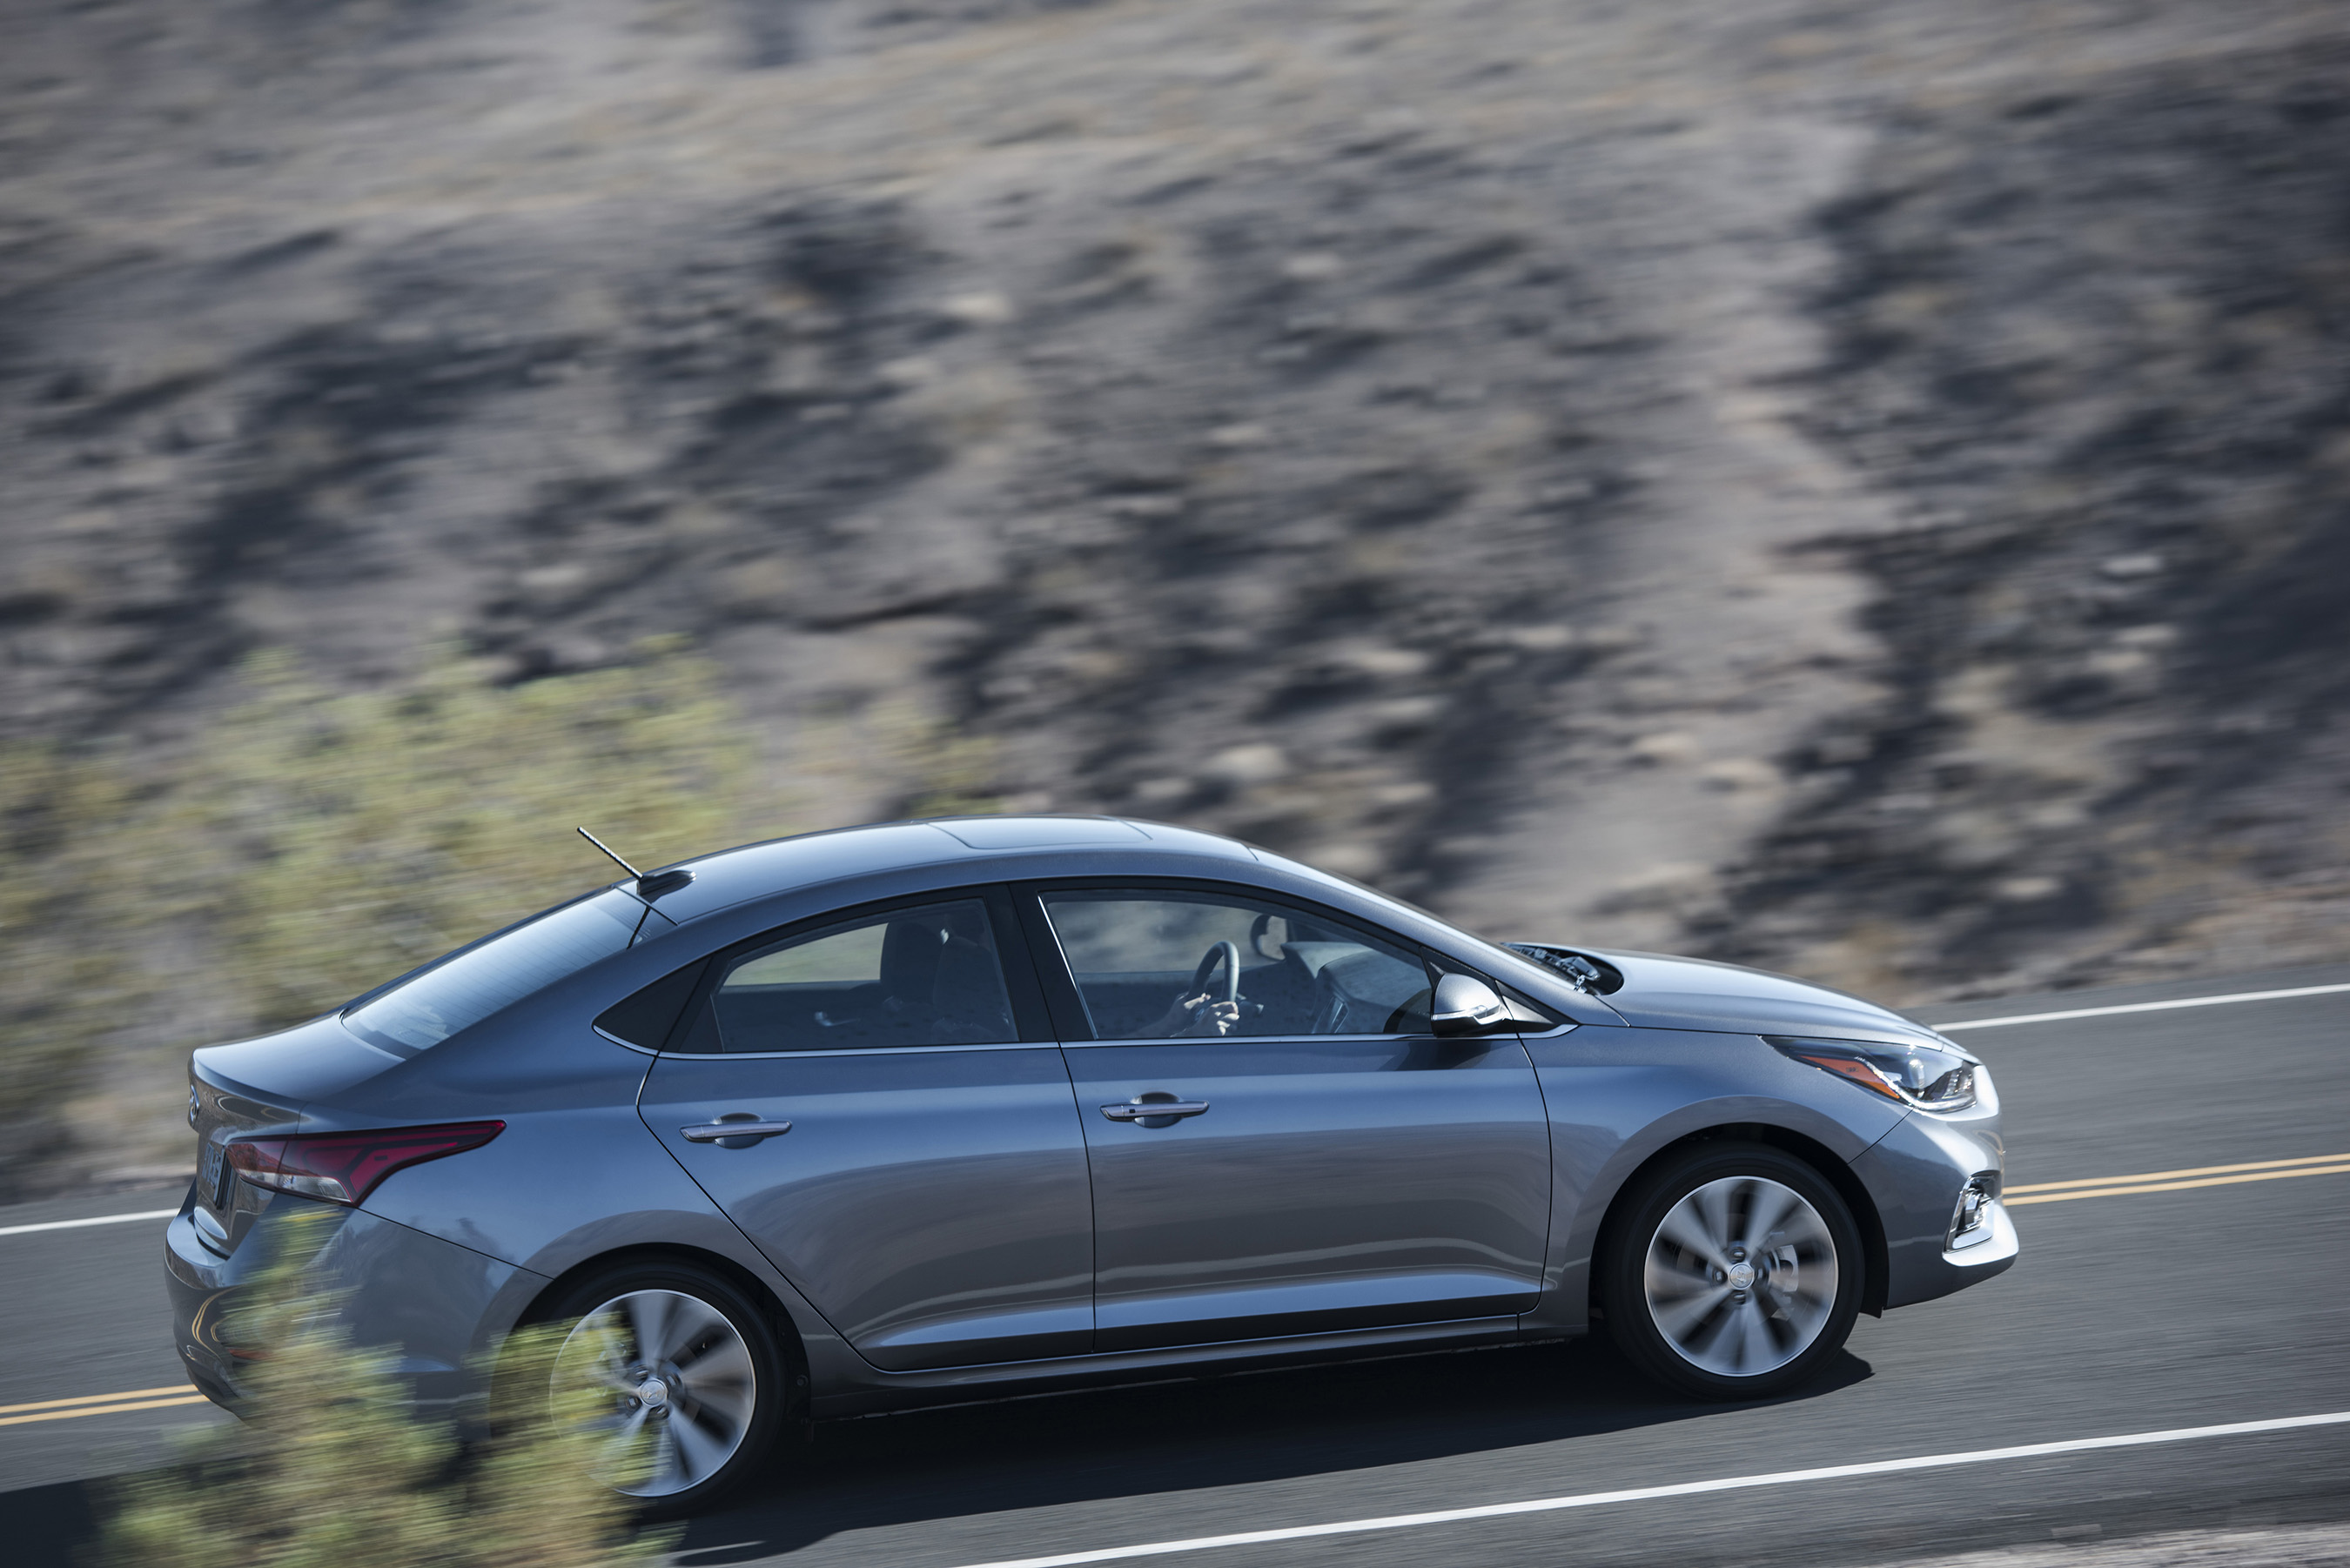 HYUNDAI HAS THE MOST IIHS TOP SAFETY PICK+ AND TOP SAFETY PICK AWARDS IN THE INDUSTRY